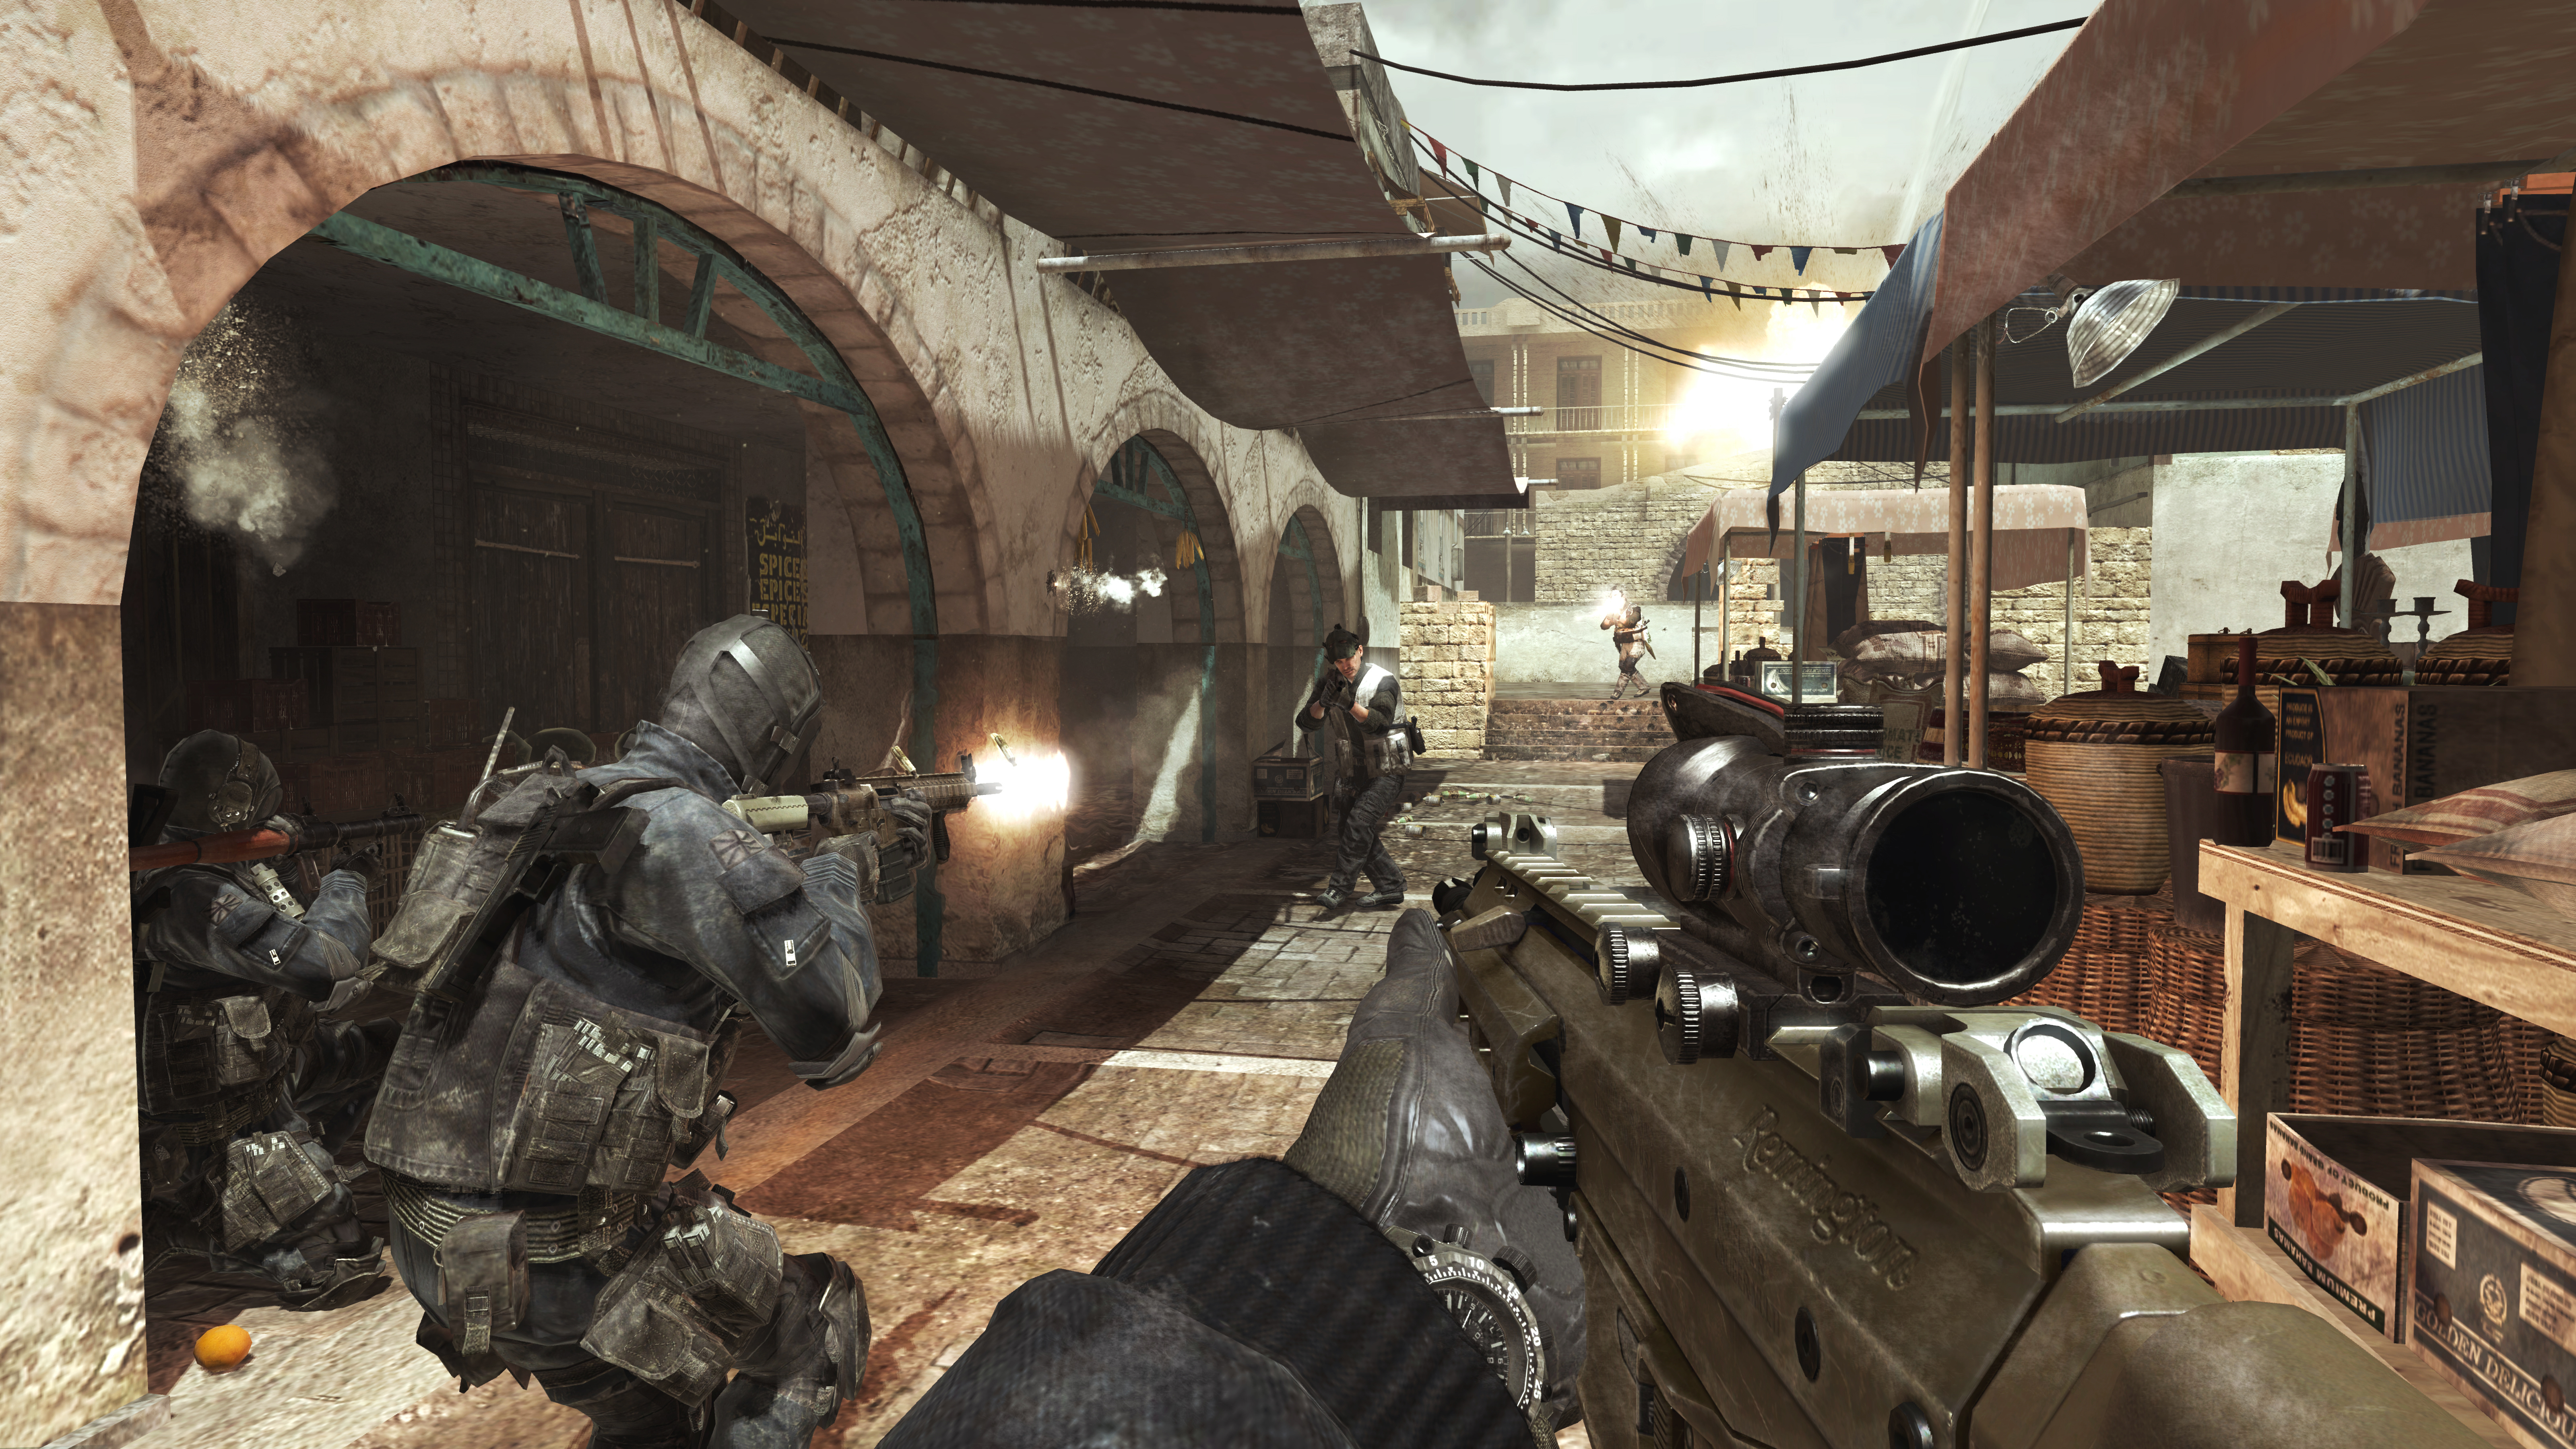 How to Play Call Of Duty Modern Warfare 3 Multiplayer Early? - News